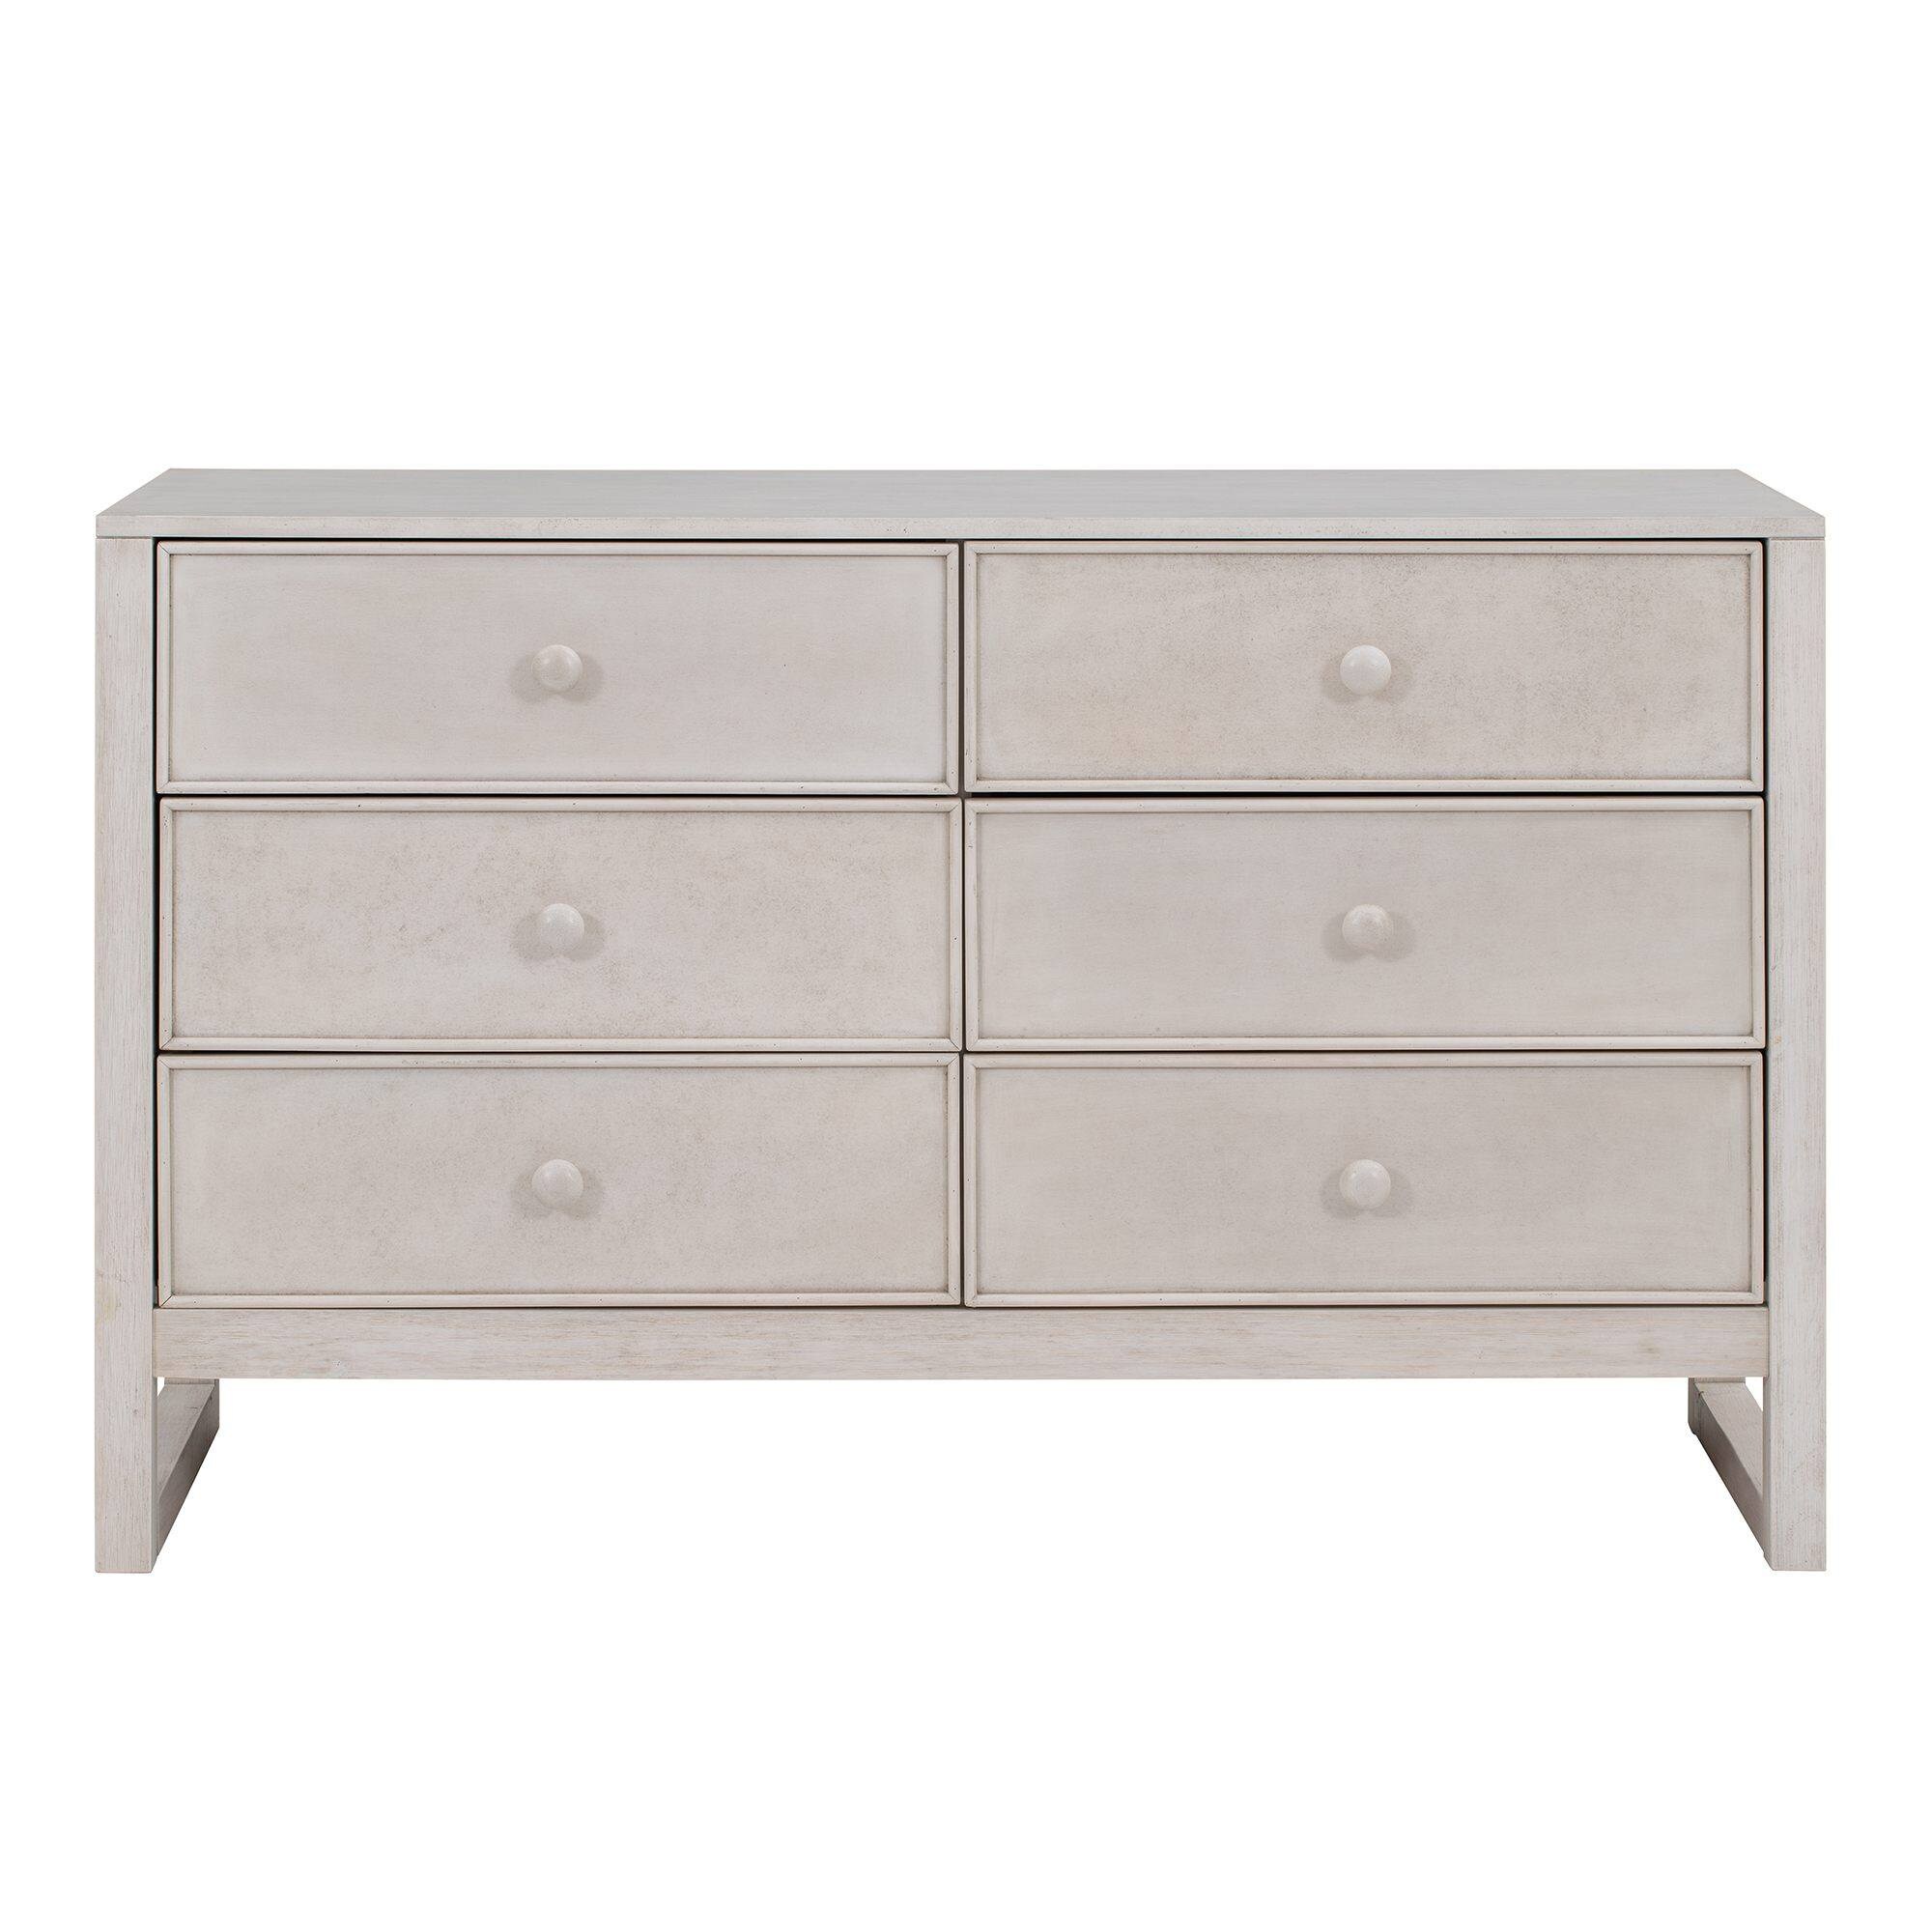 Yiekholo Antique White Pine 6-Drawer Standard Dresser in the Dressers ...